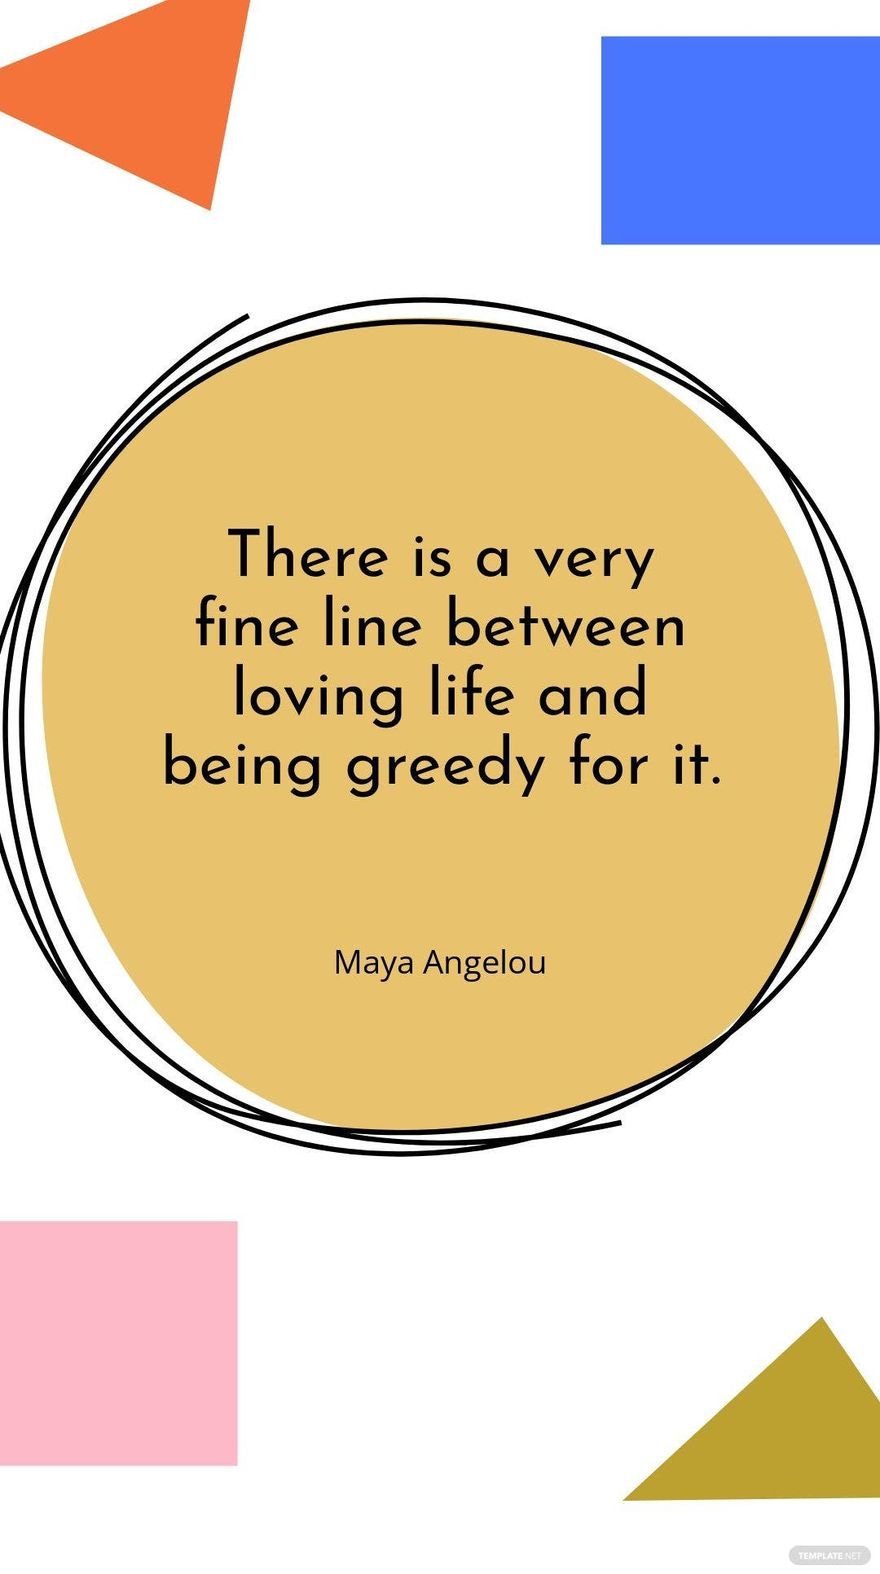 Maya Angelou - There is a very fine line between loving life and being greedy for it.